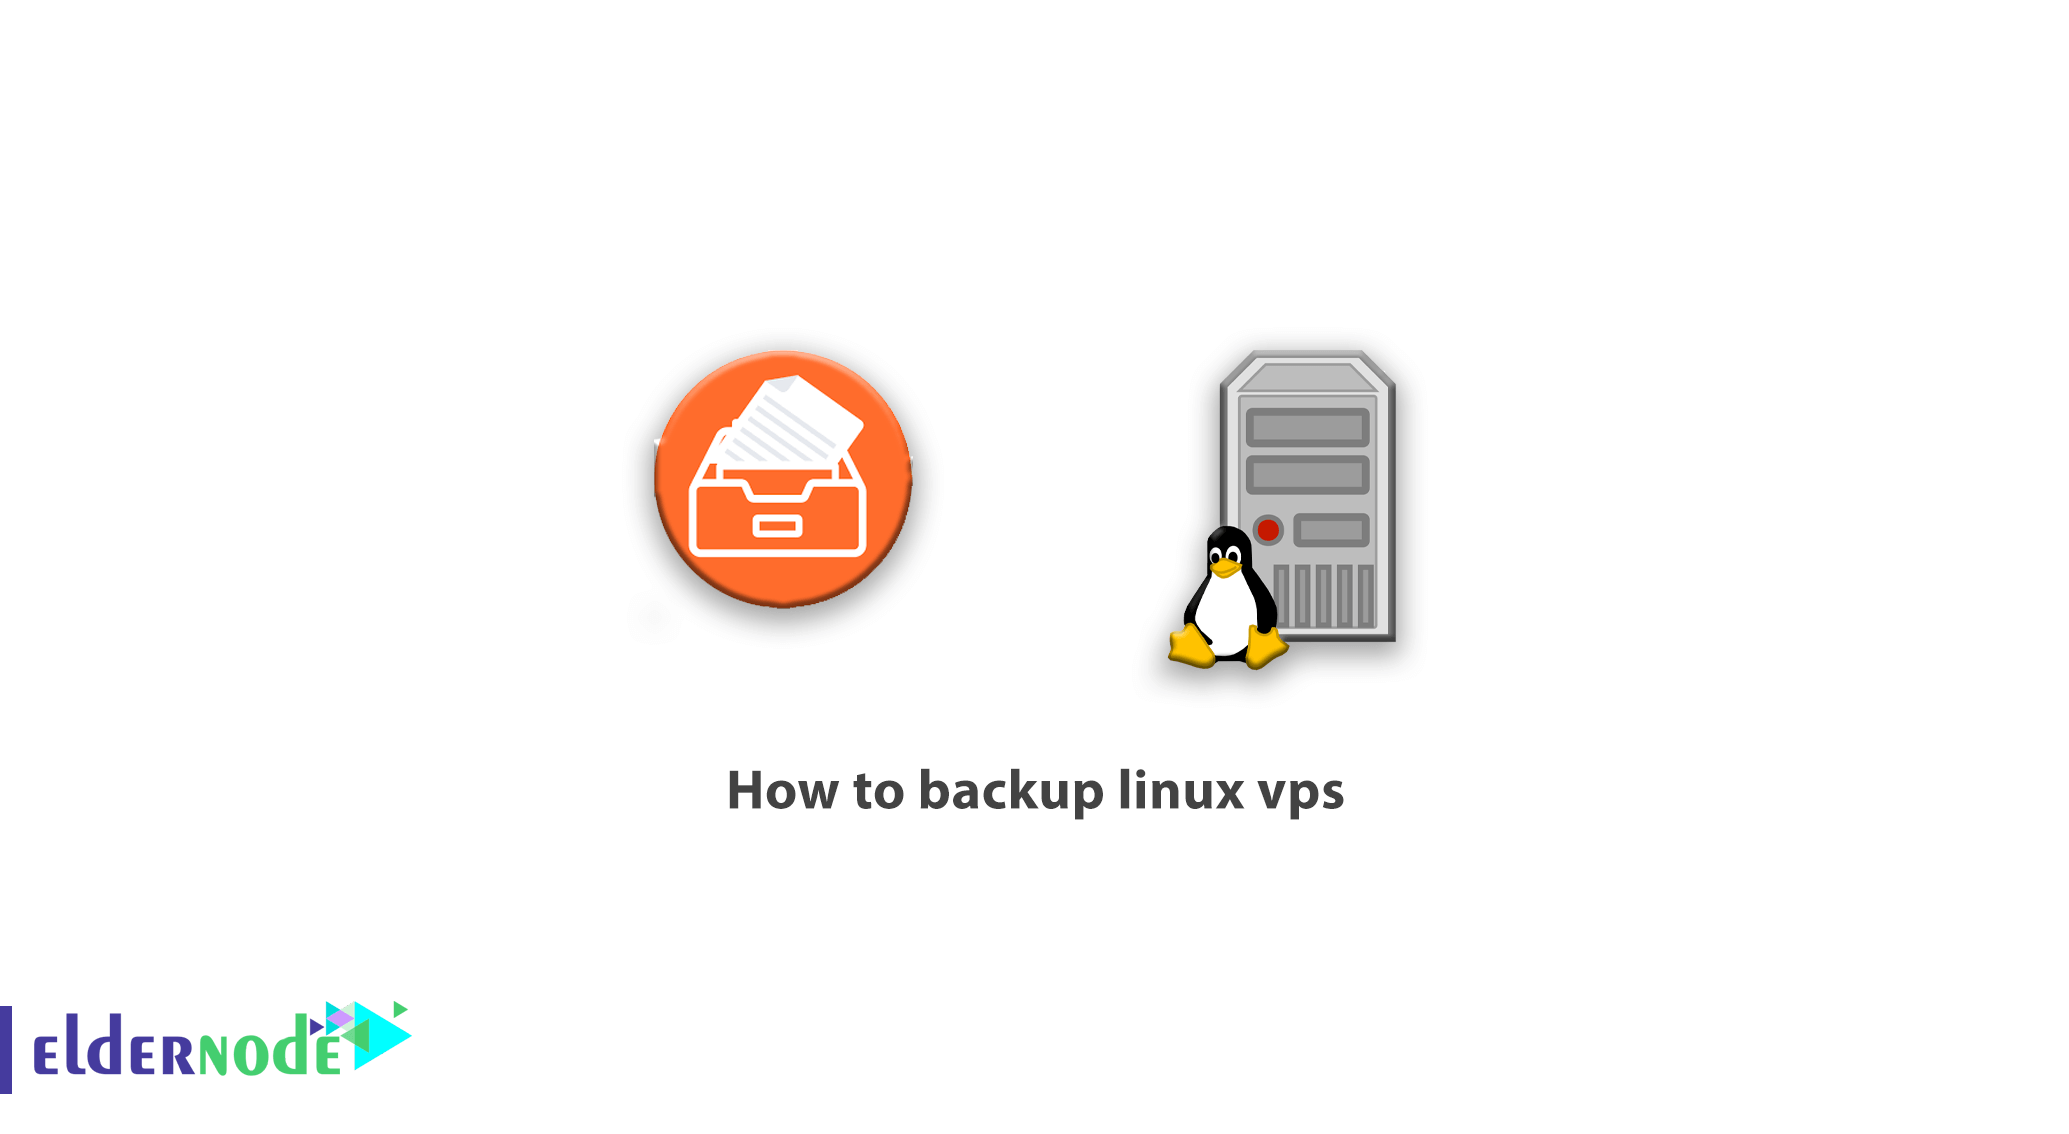 How to backup linux vps